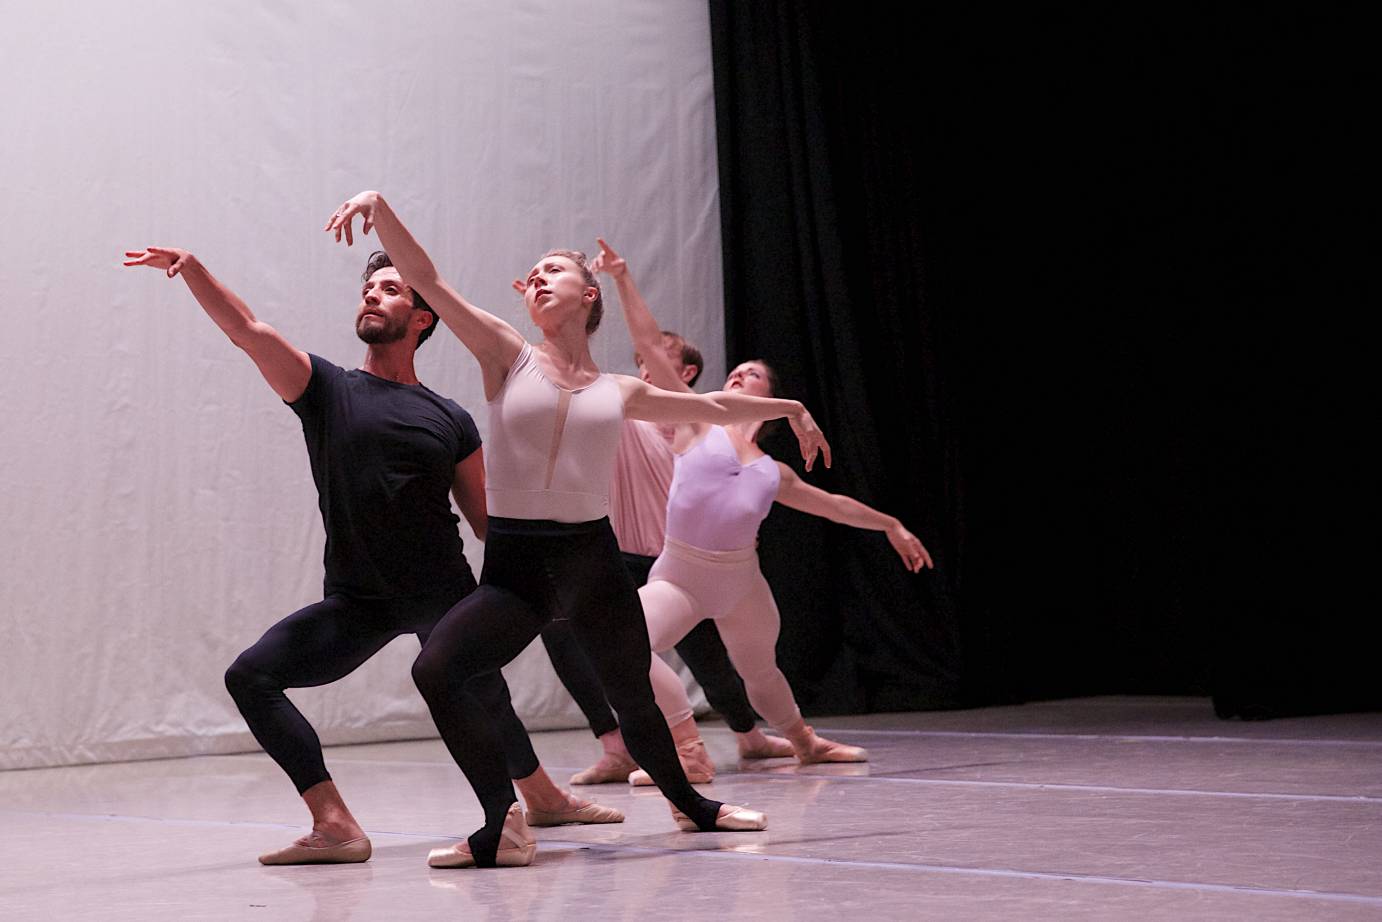 Four people in ballet practice clothes lunge with arabesque arms